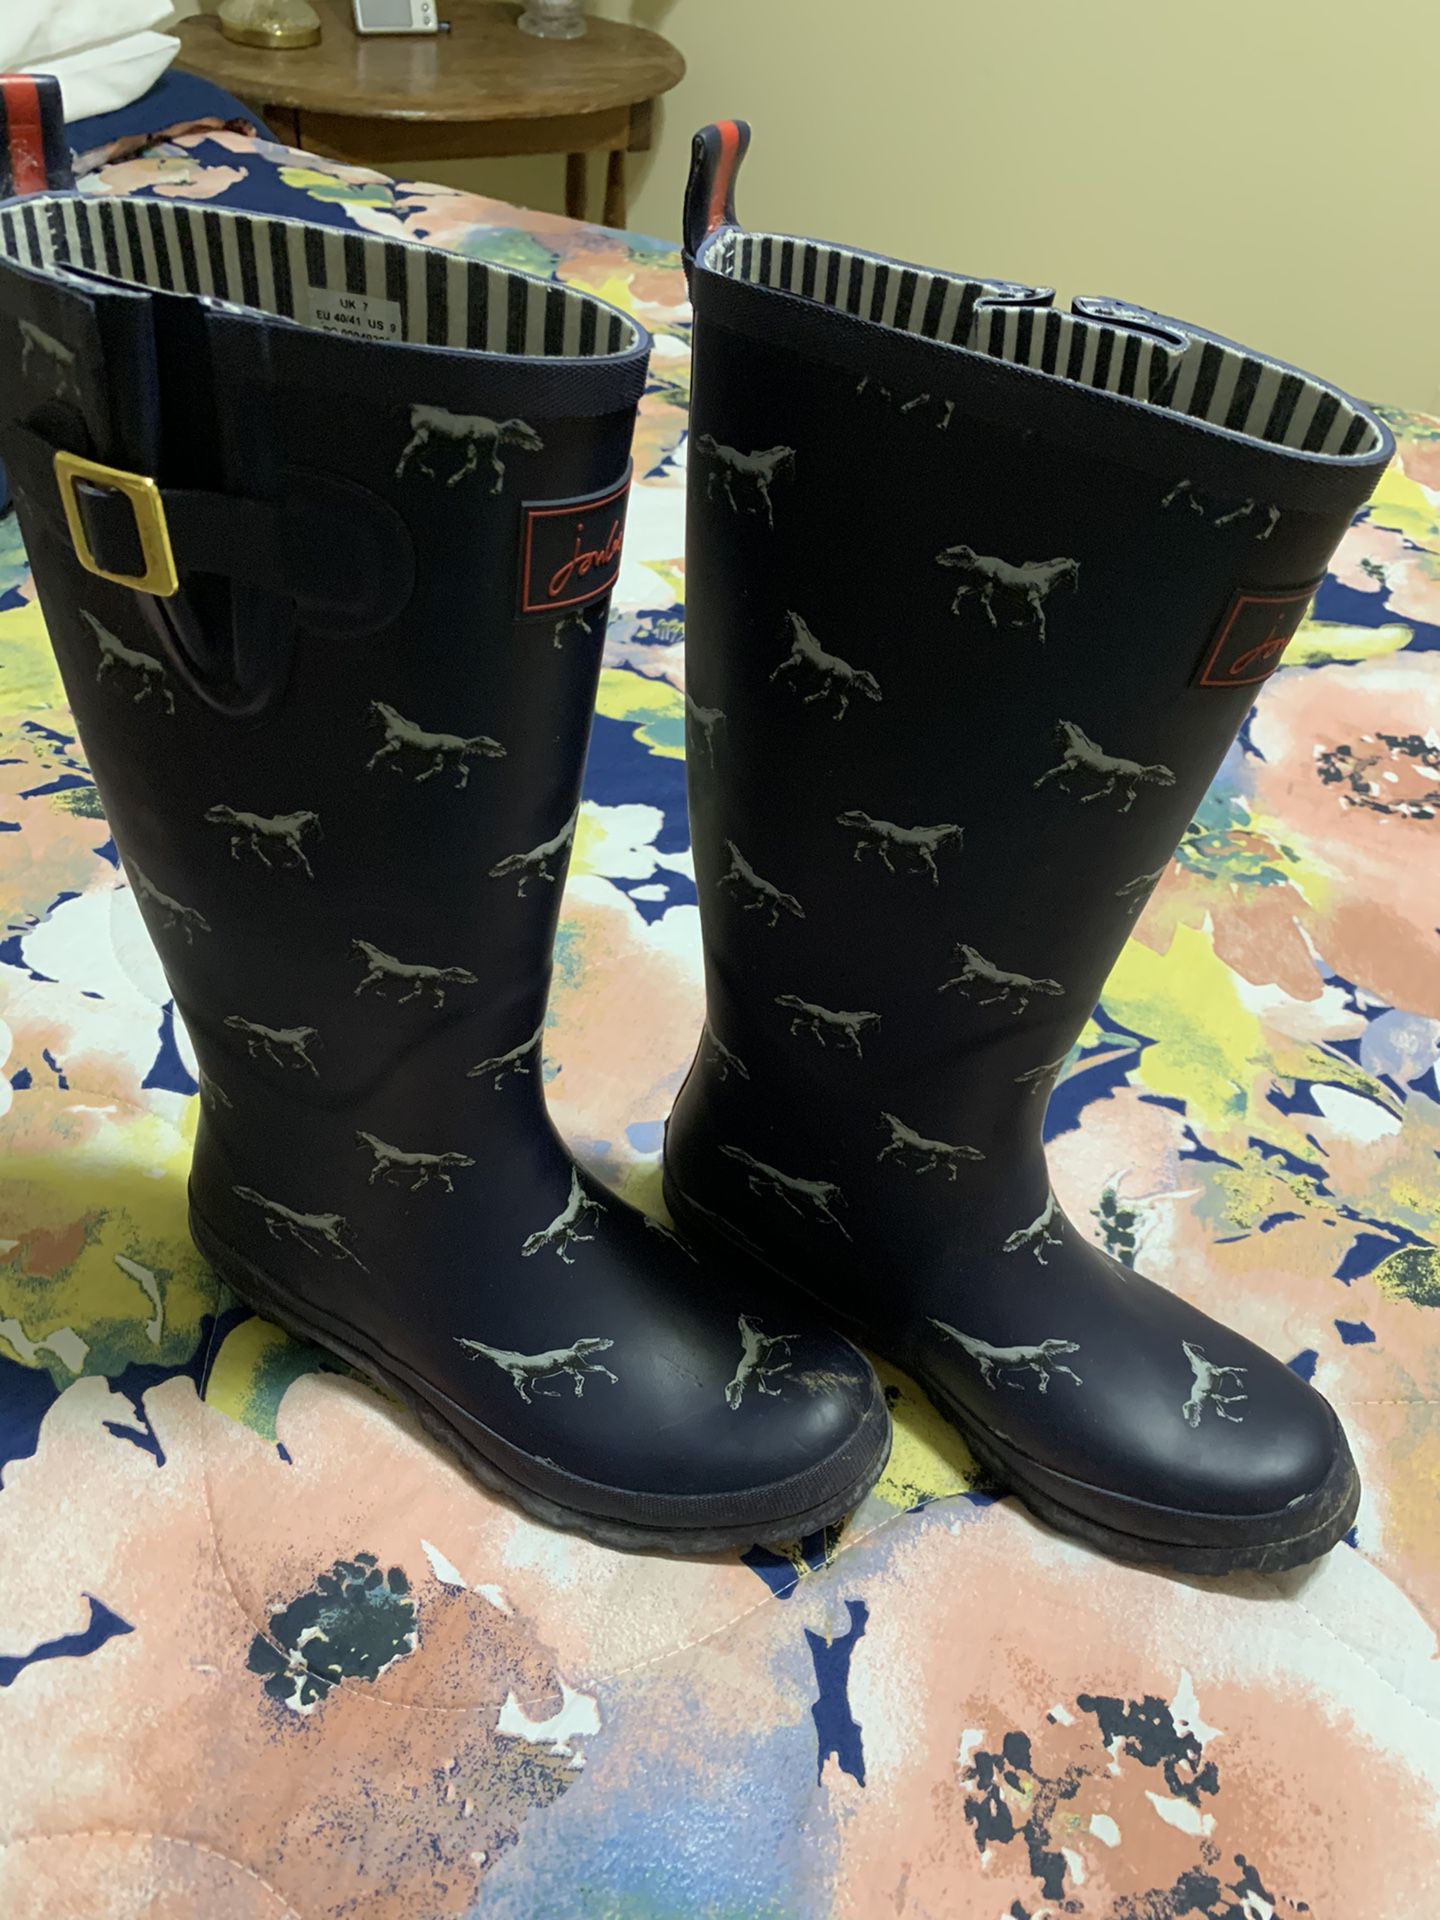 Heavy rubber rain boots with horses